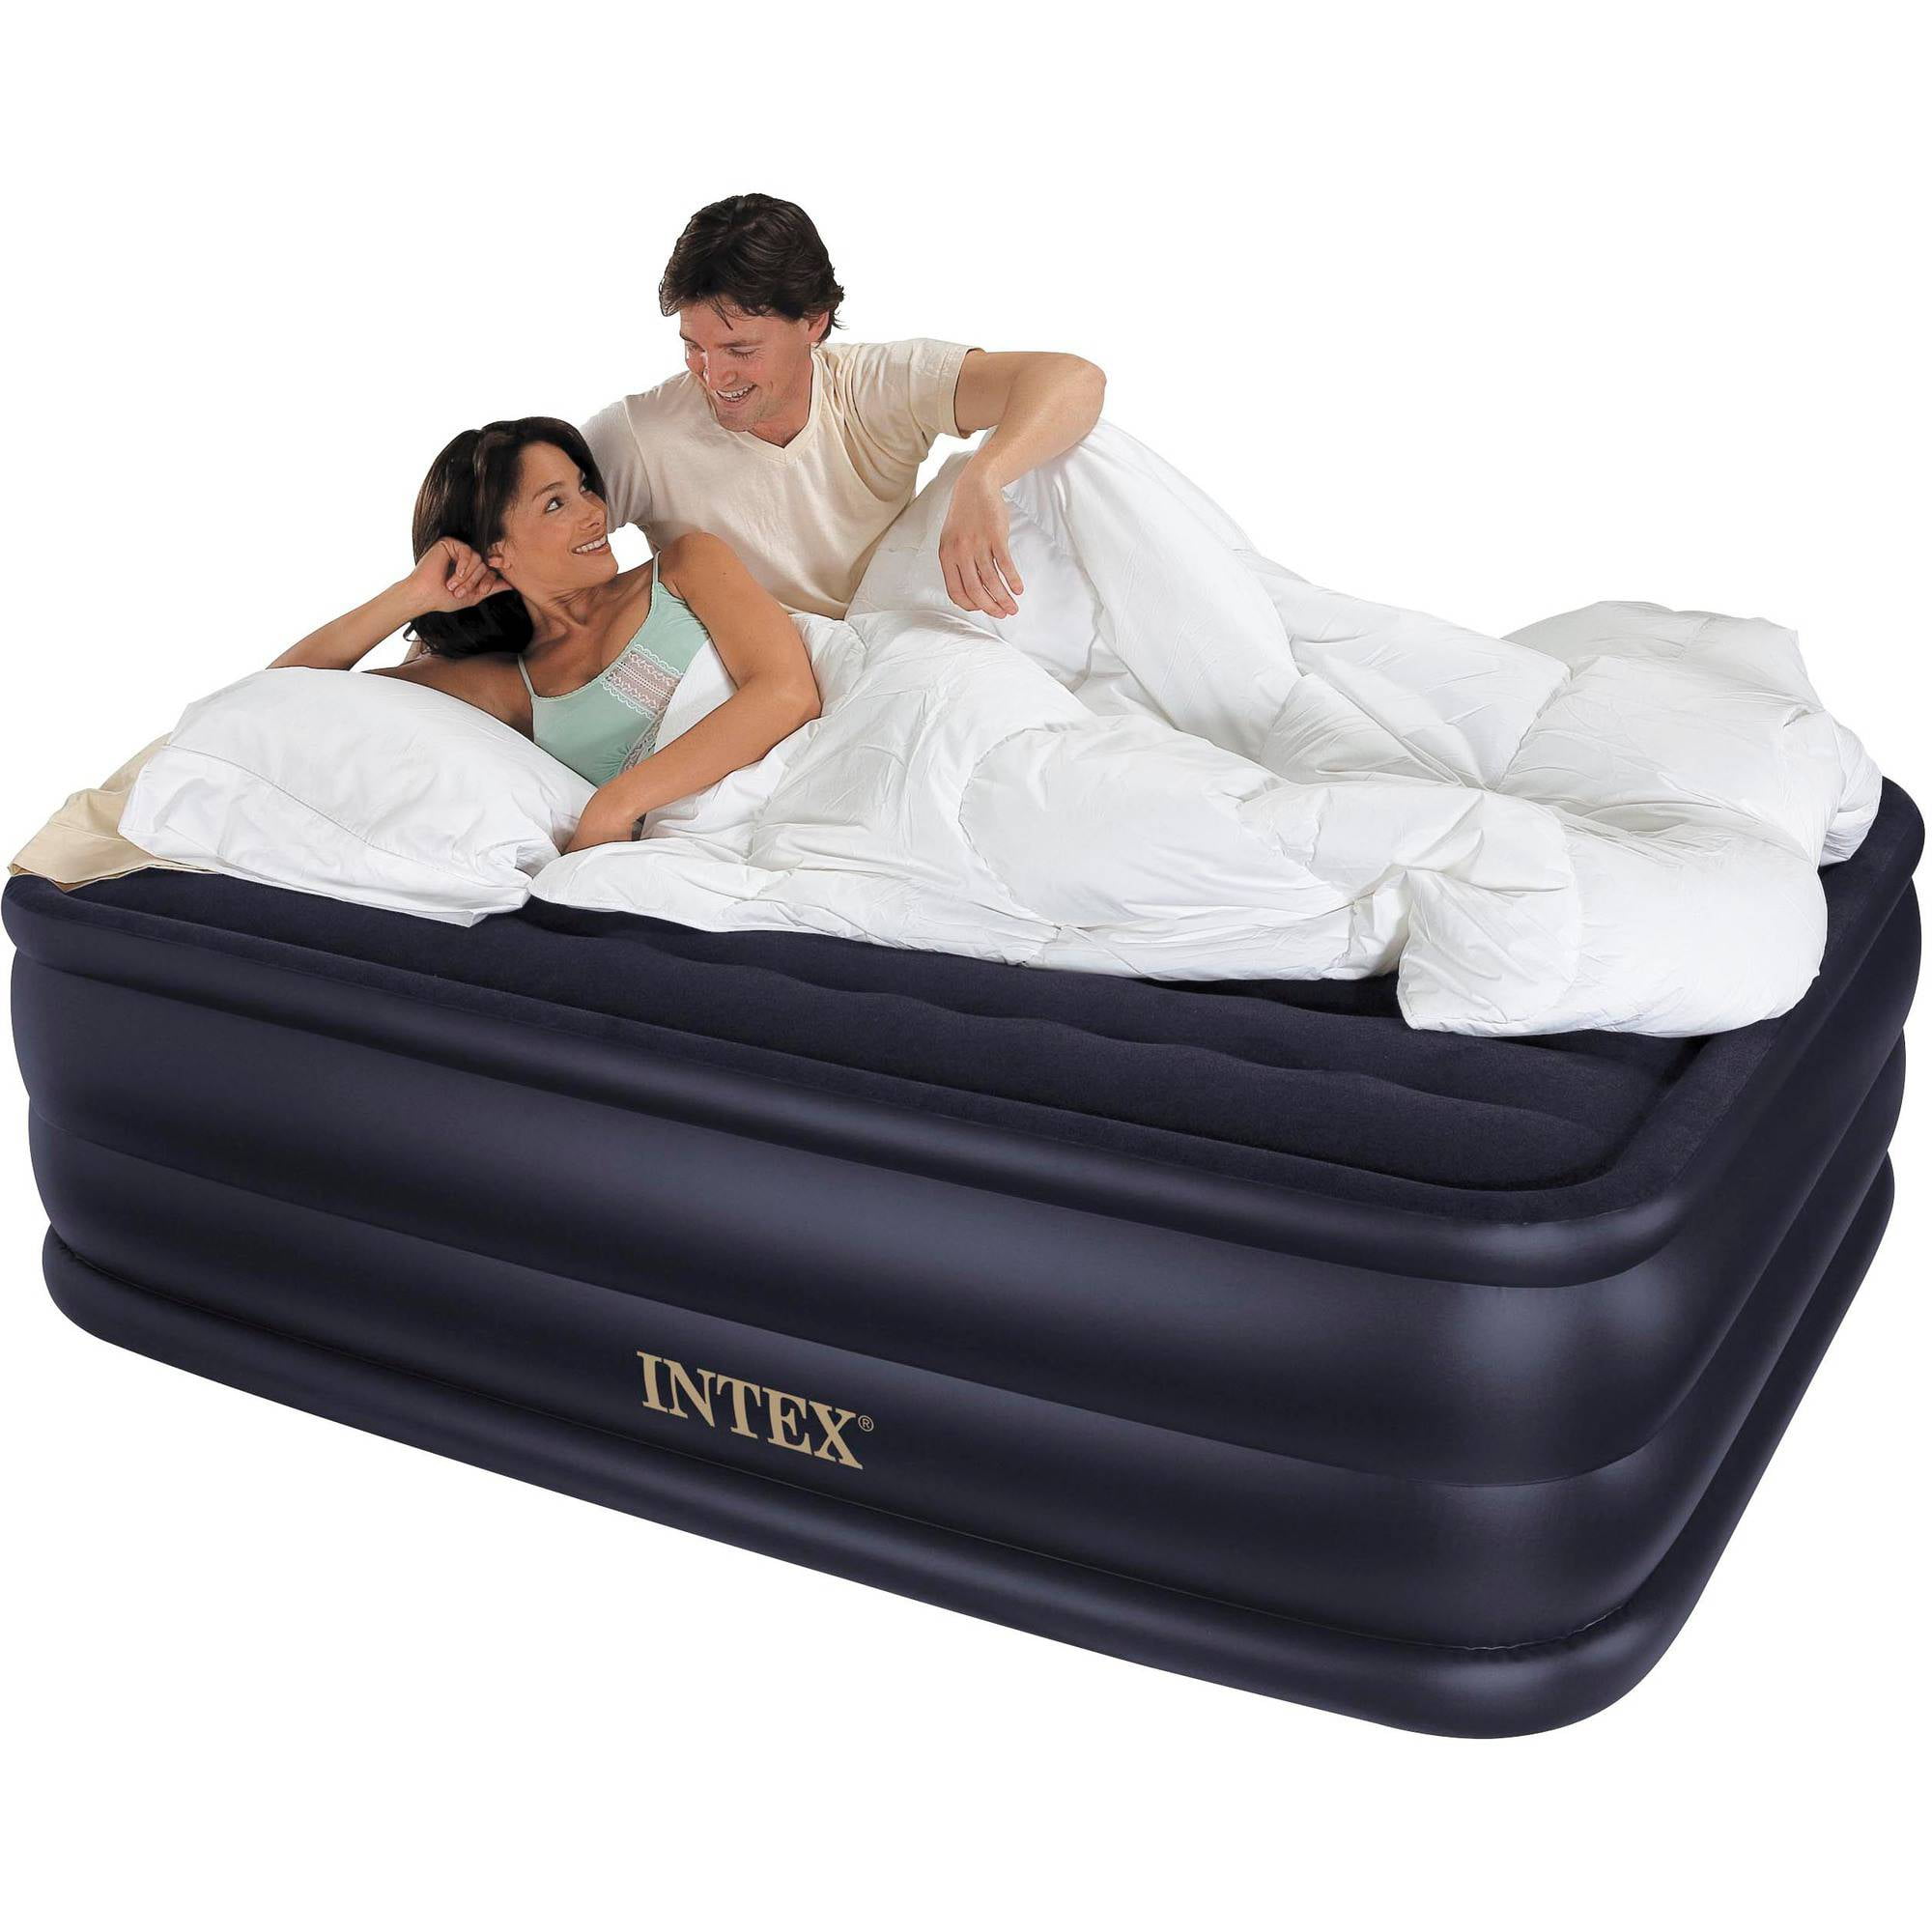 Intex Queen Raised Downy Inflatable Indoor Air Mattress Bed with Built-In Pump 